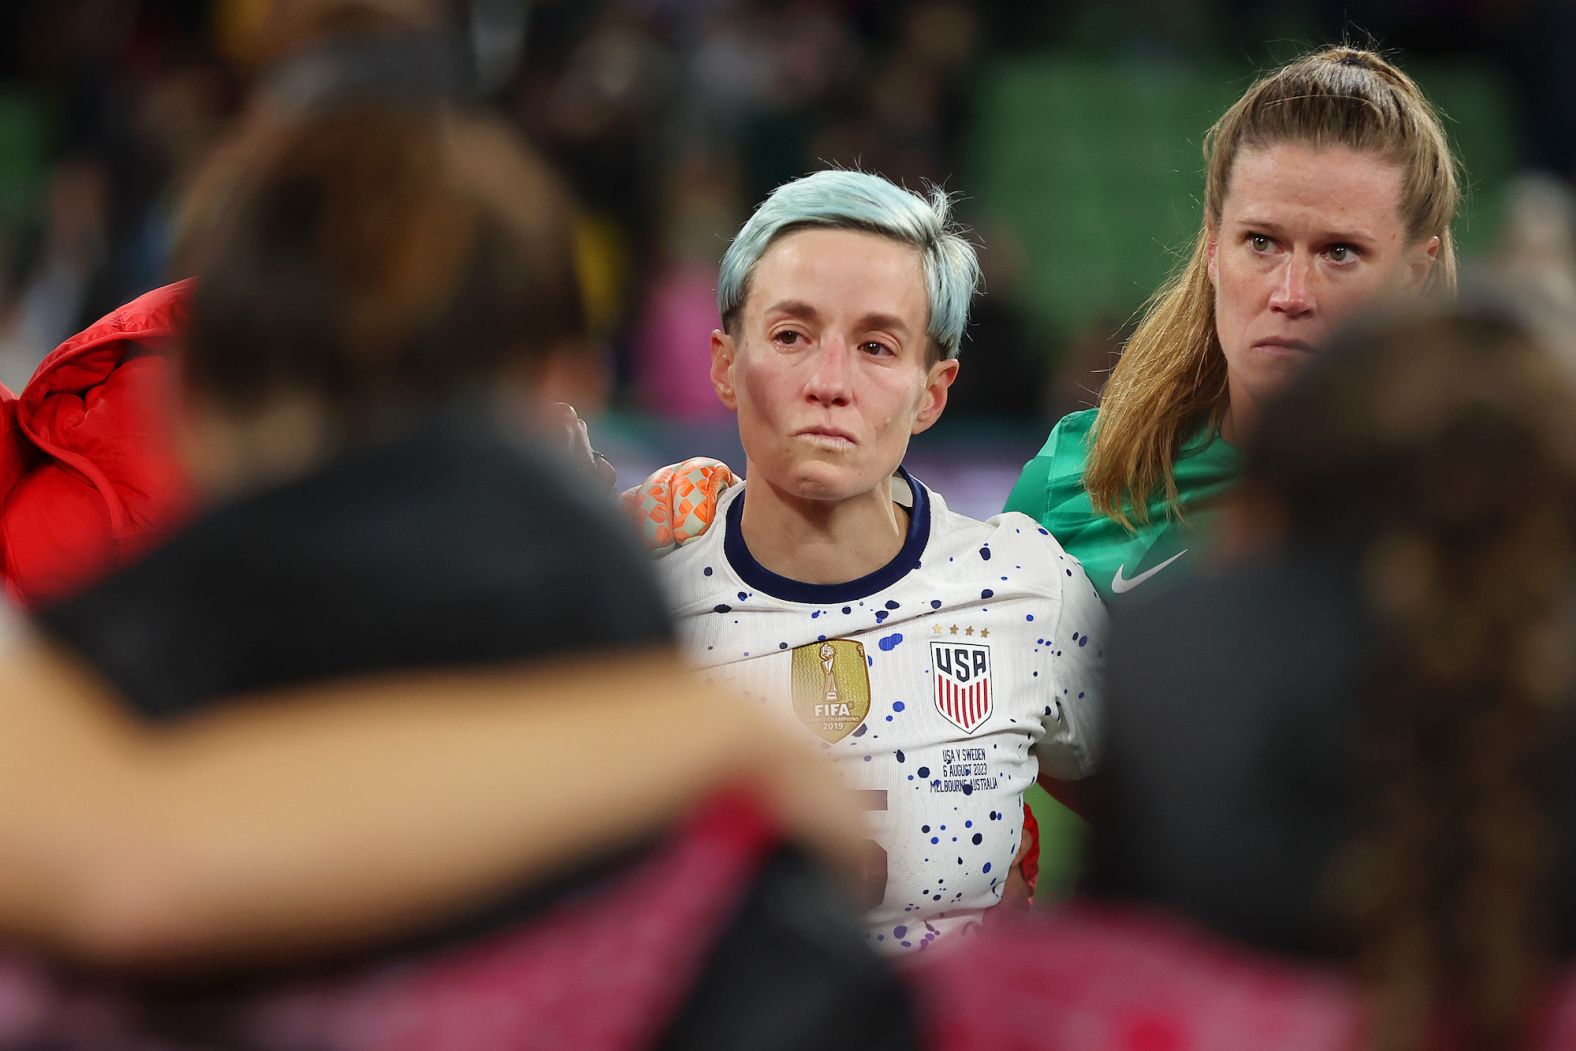 Rapinoe reacts to her team being <a href="https://www.cnn.com/2023/08/05/football/usa-sweden-womens-world-cup-2023-spt-intl/index.html" target="_blank">knocked out of the Women's World Cup</a> after a shootout loss to Sweden in August 2023.